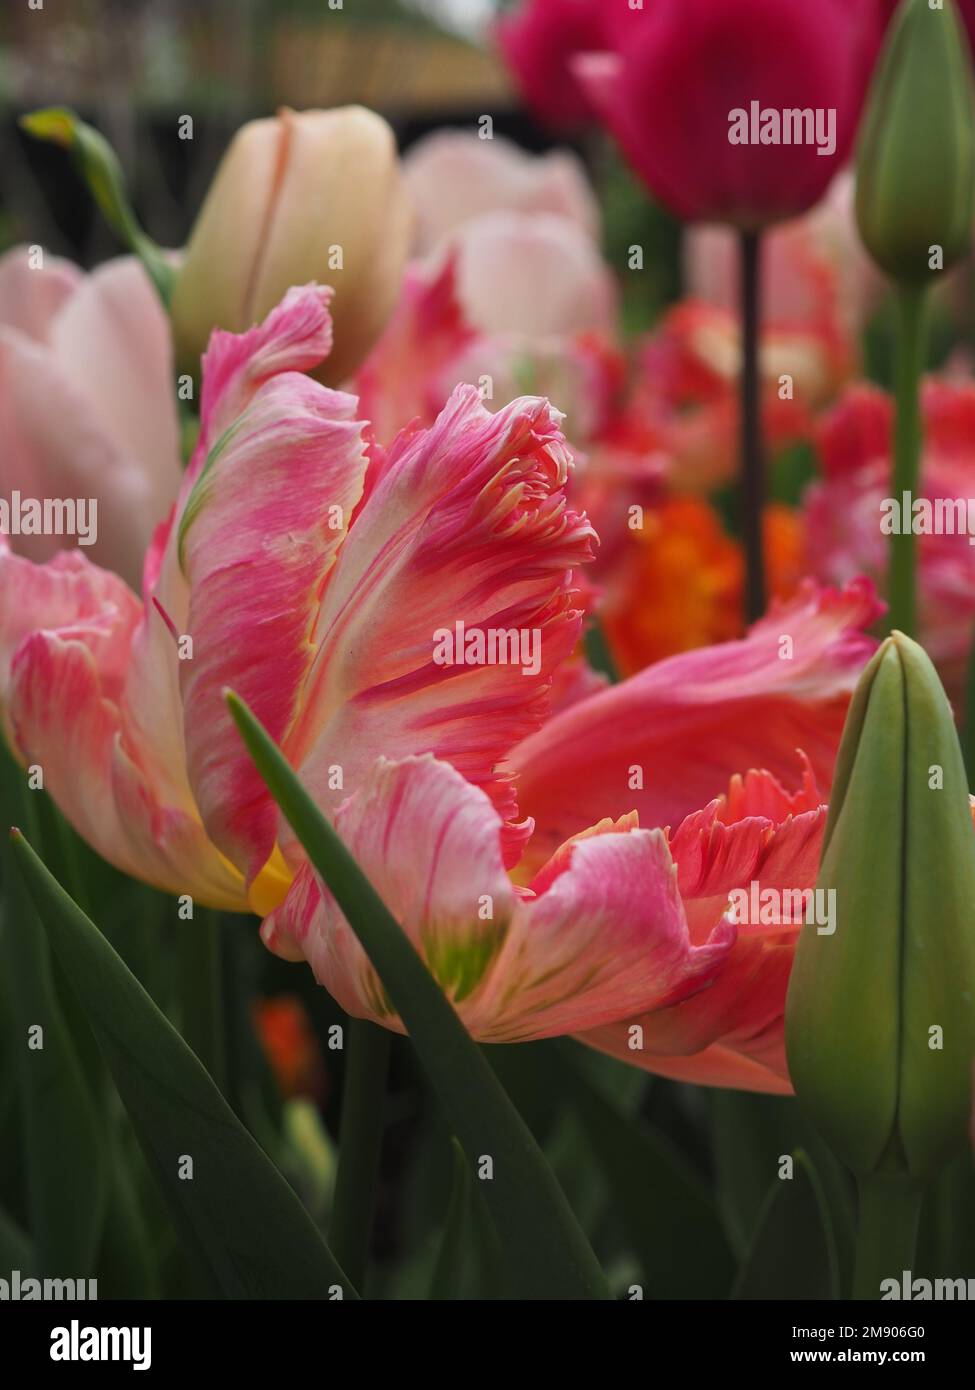 Close up of a Tulipa 'Apricot Parrot' flower growing in a tulip border Stock Photo